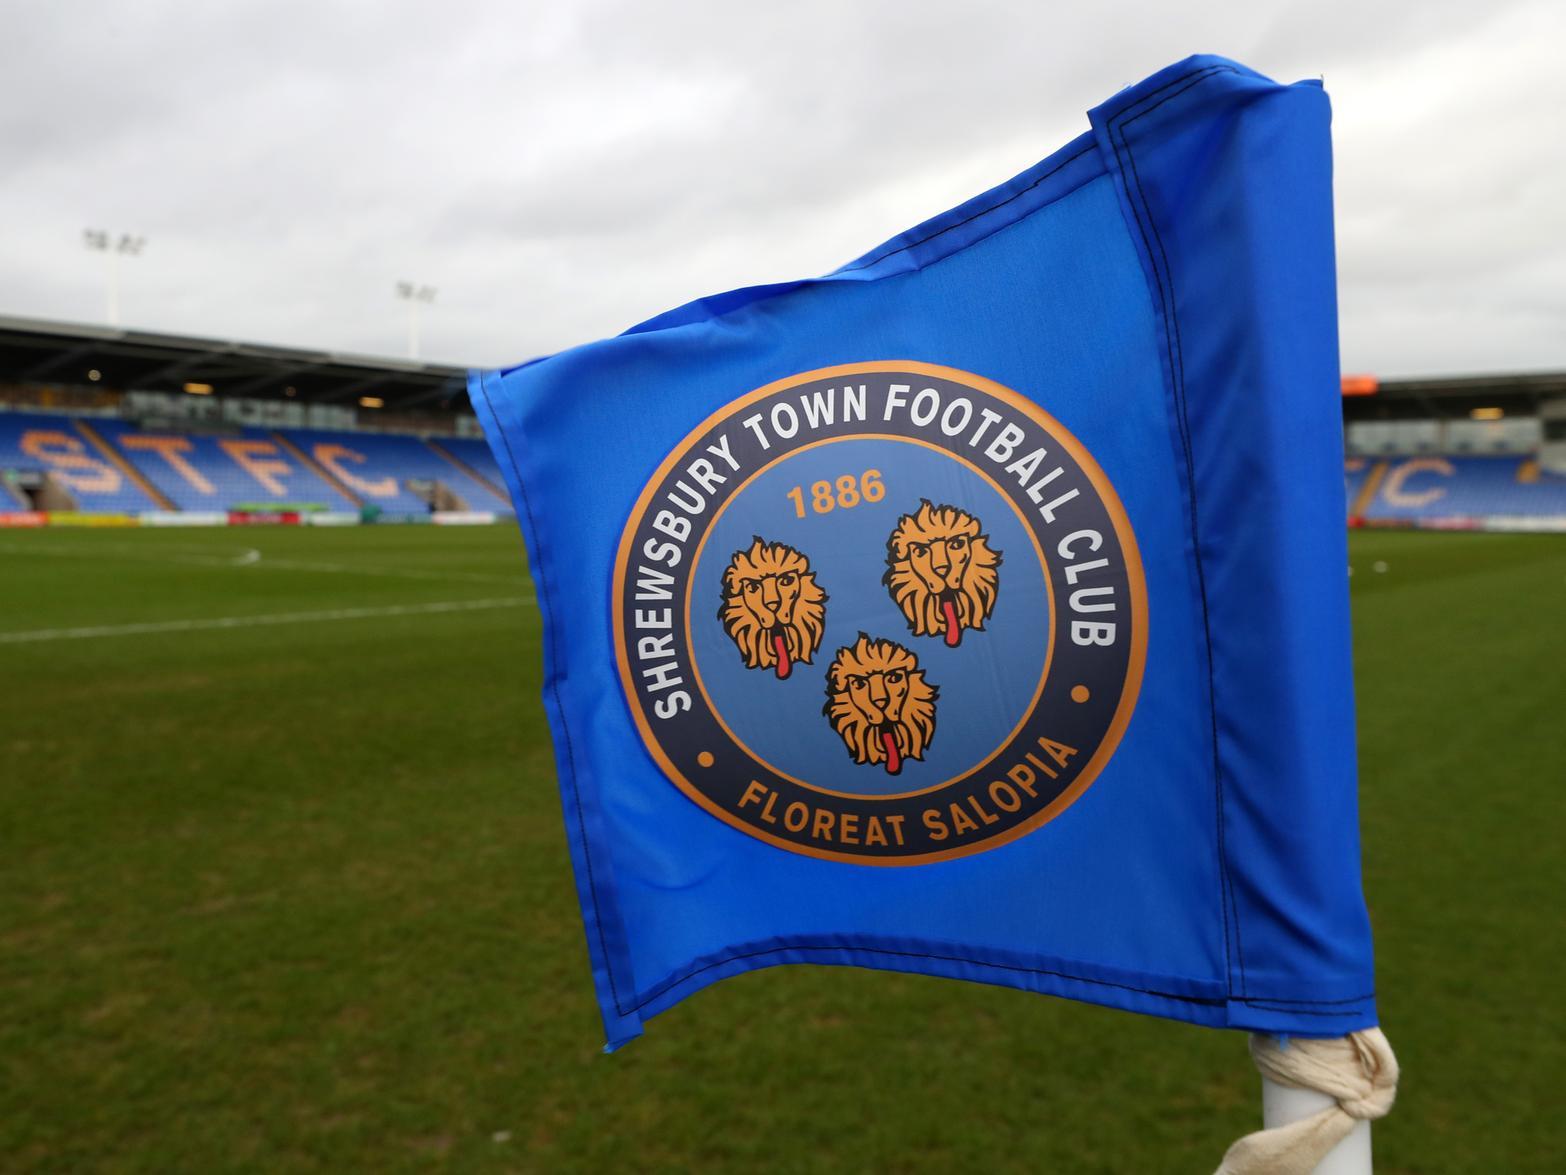 The joint-lowest scorers in the division this season, watching the Shrews in action has been far from a treat. The bookies don't fancy their chances of going up either.